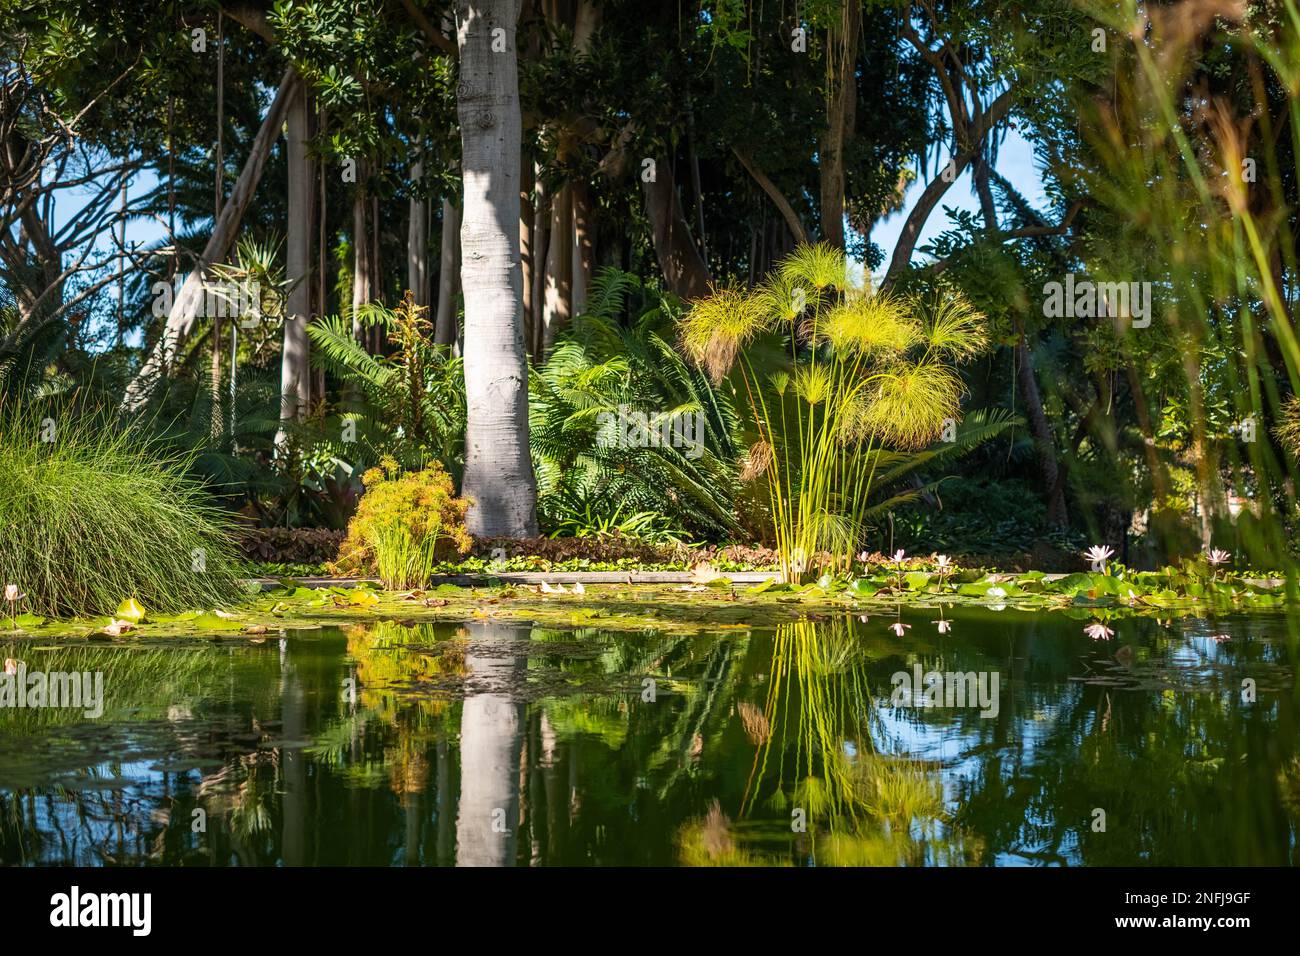 pond in tropical forest, tropic nature Stock Photo